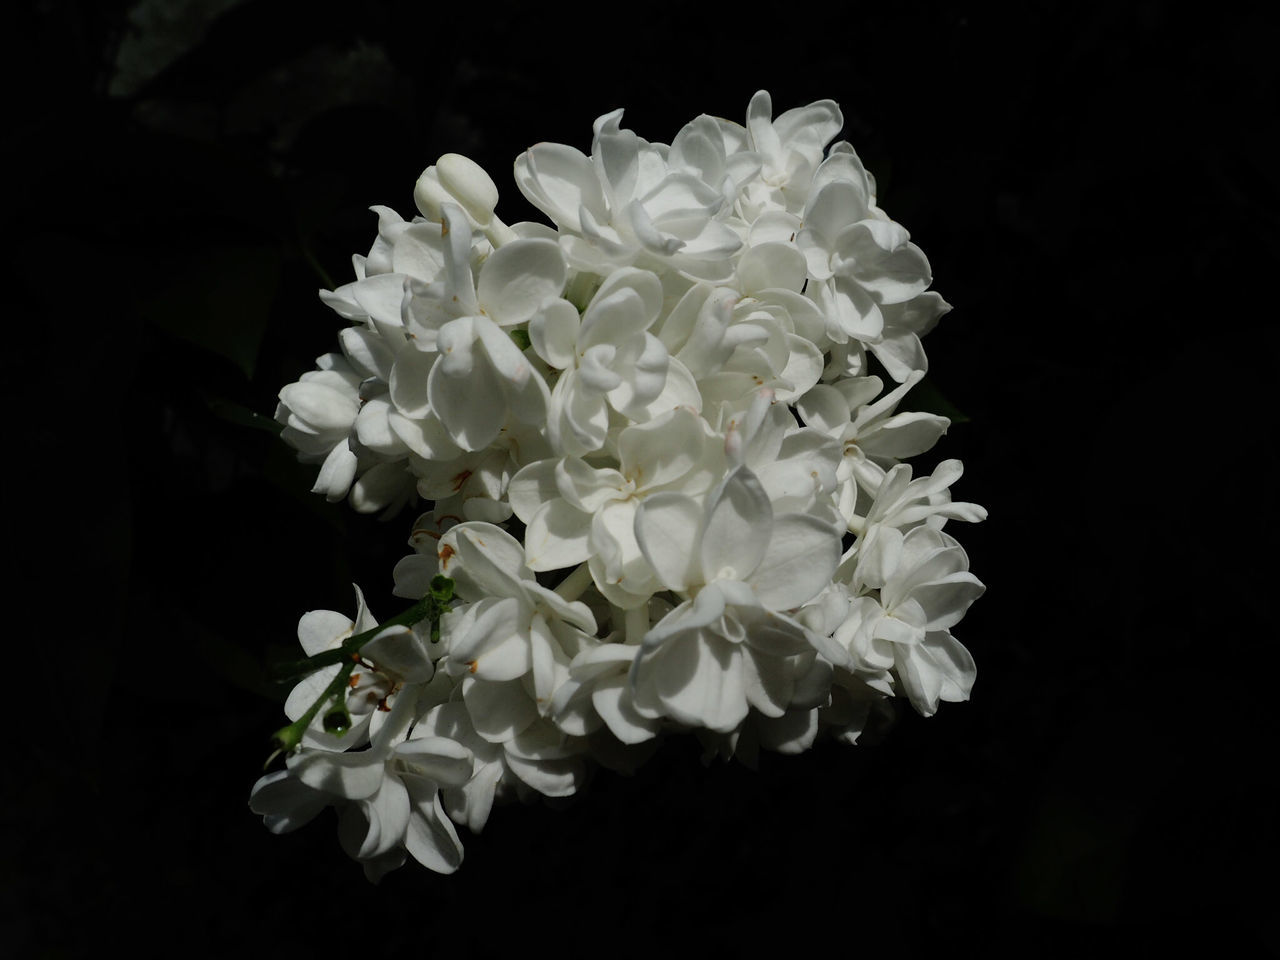 CLOSE-UP OF WHITE FLOWERS